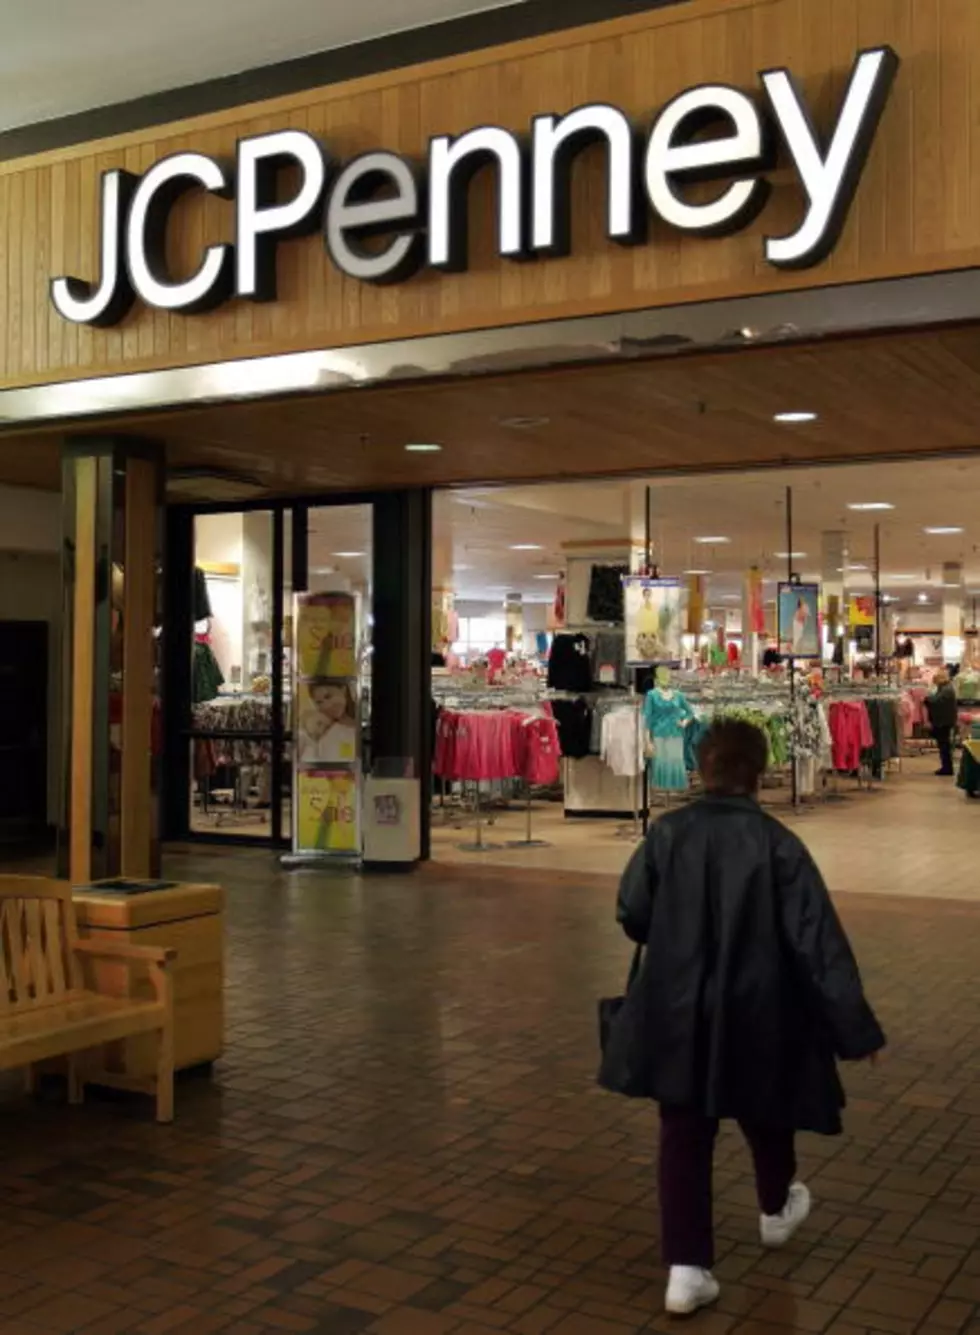 Michigan Woman Retires After 67 Years At J.C. Penney’s [Video]